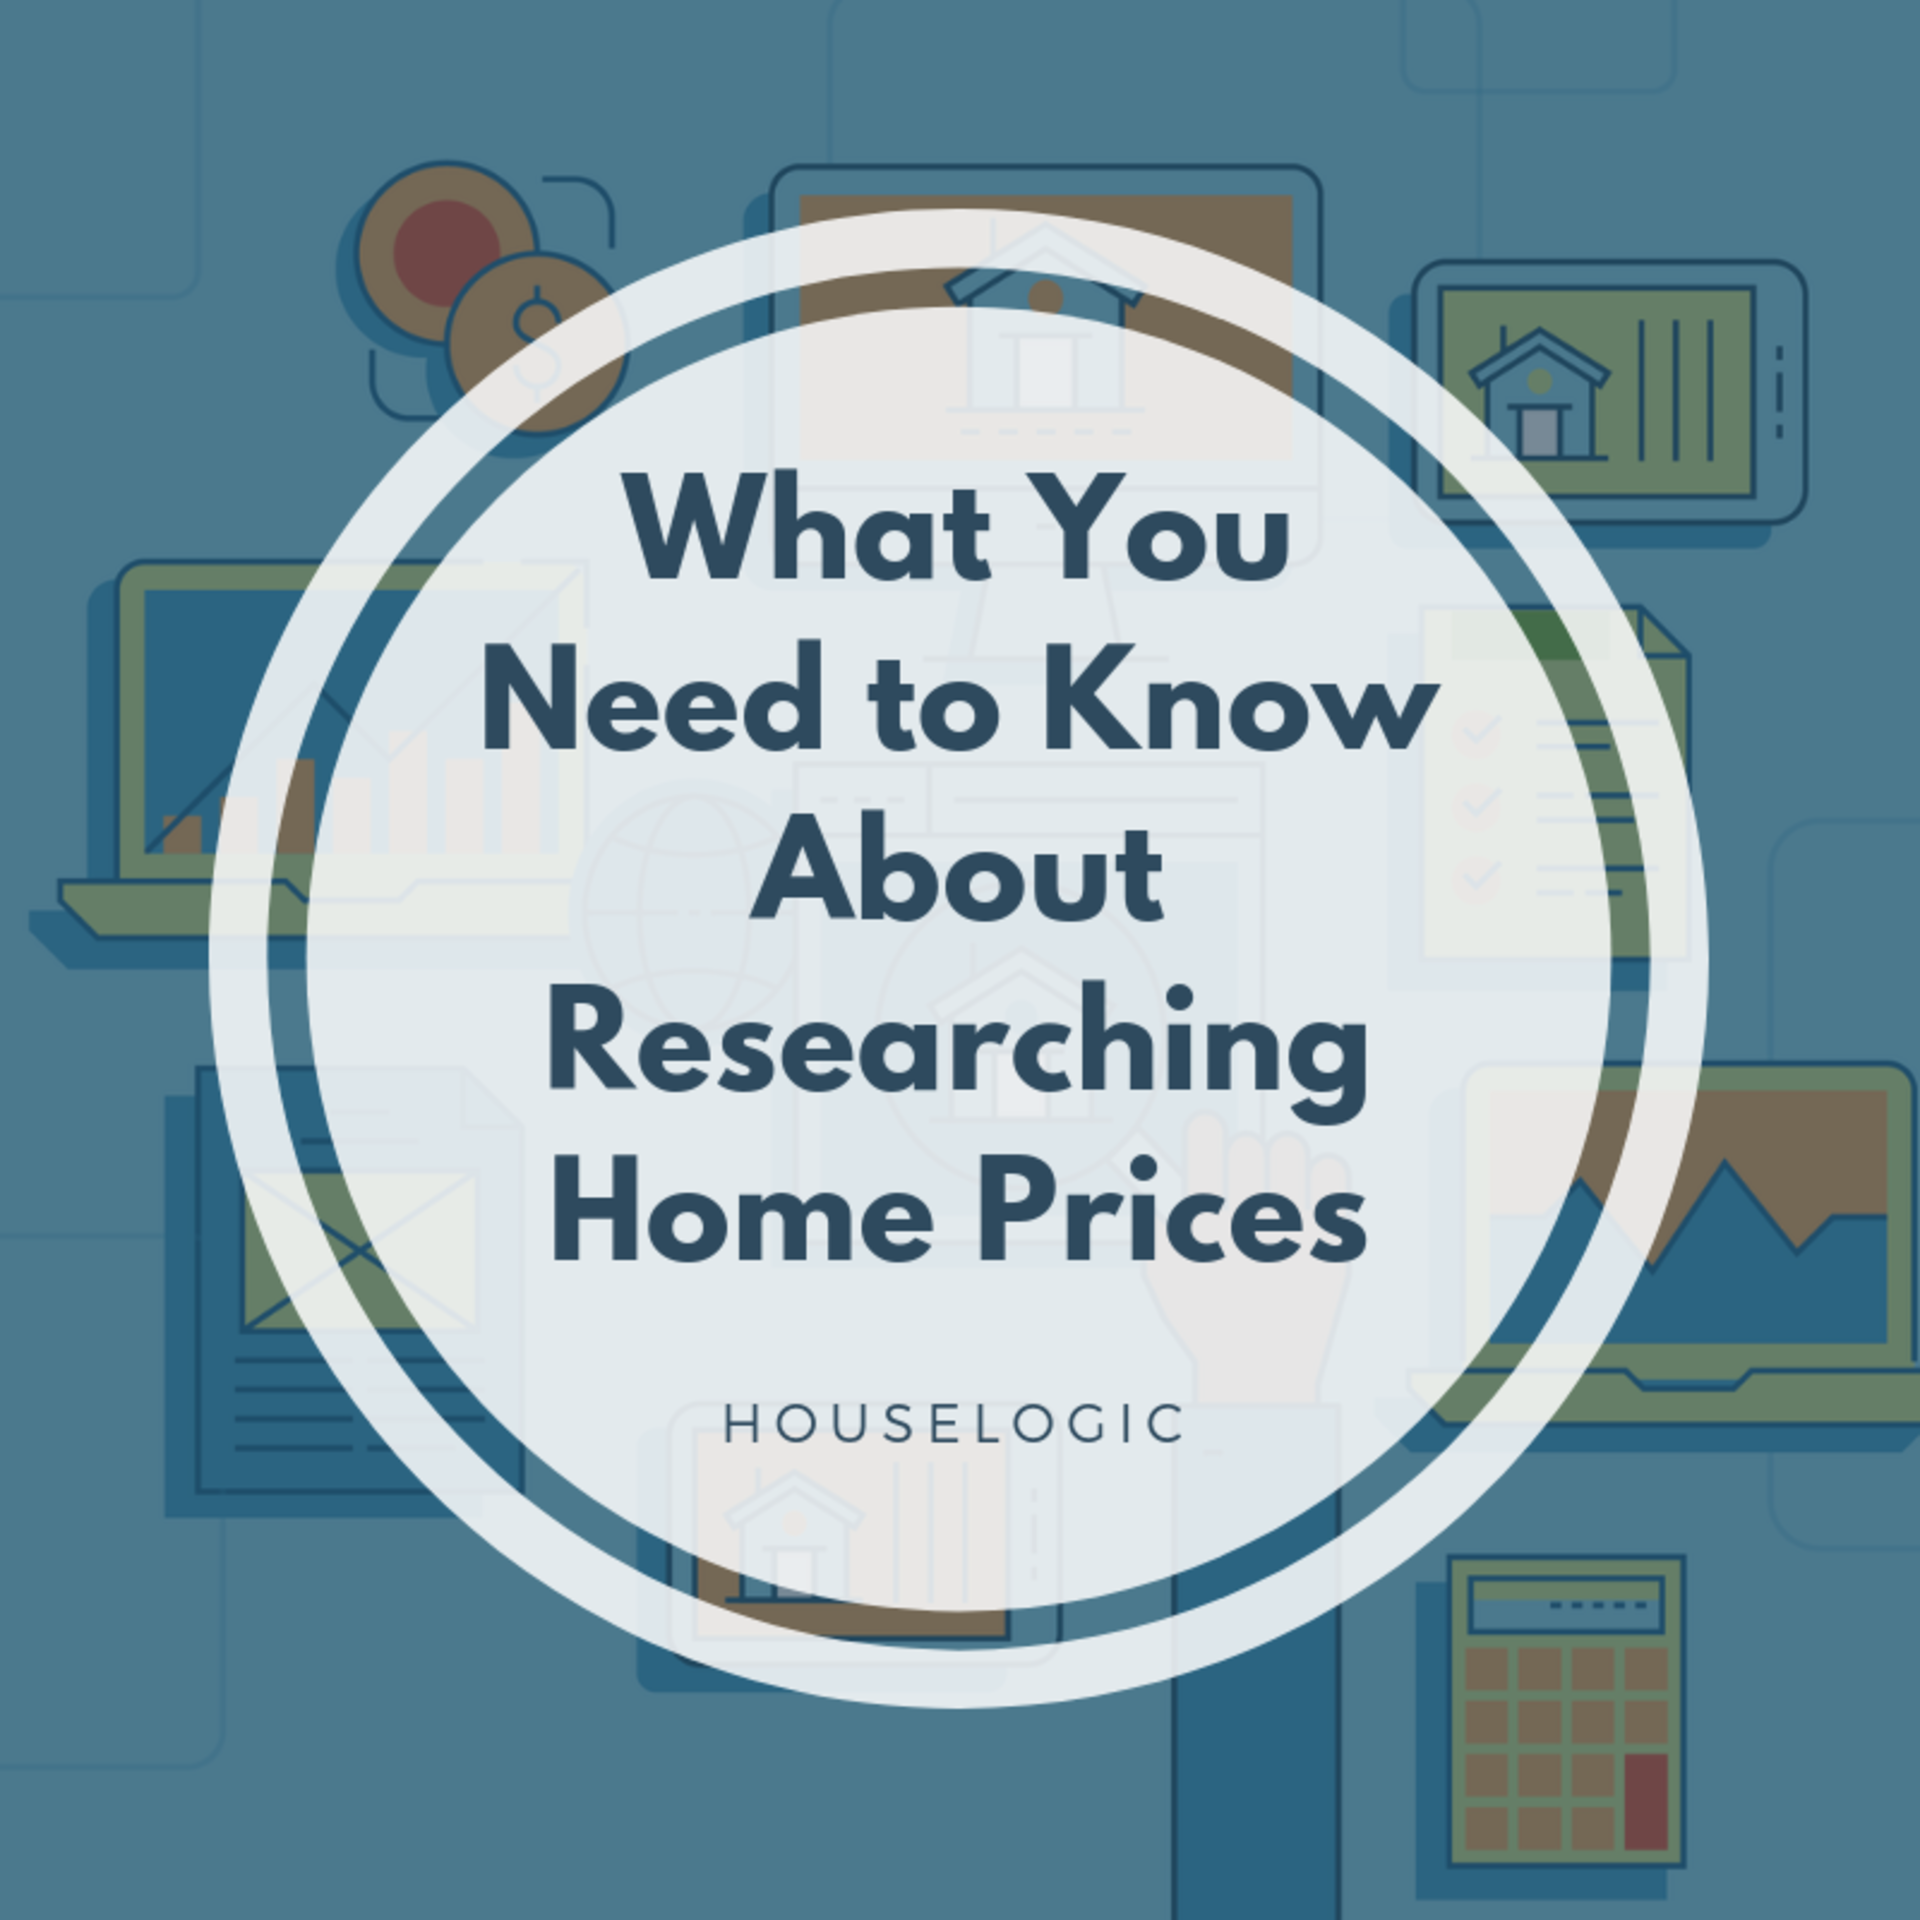 What You Need to Know About Researching Home Prices